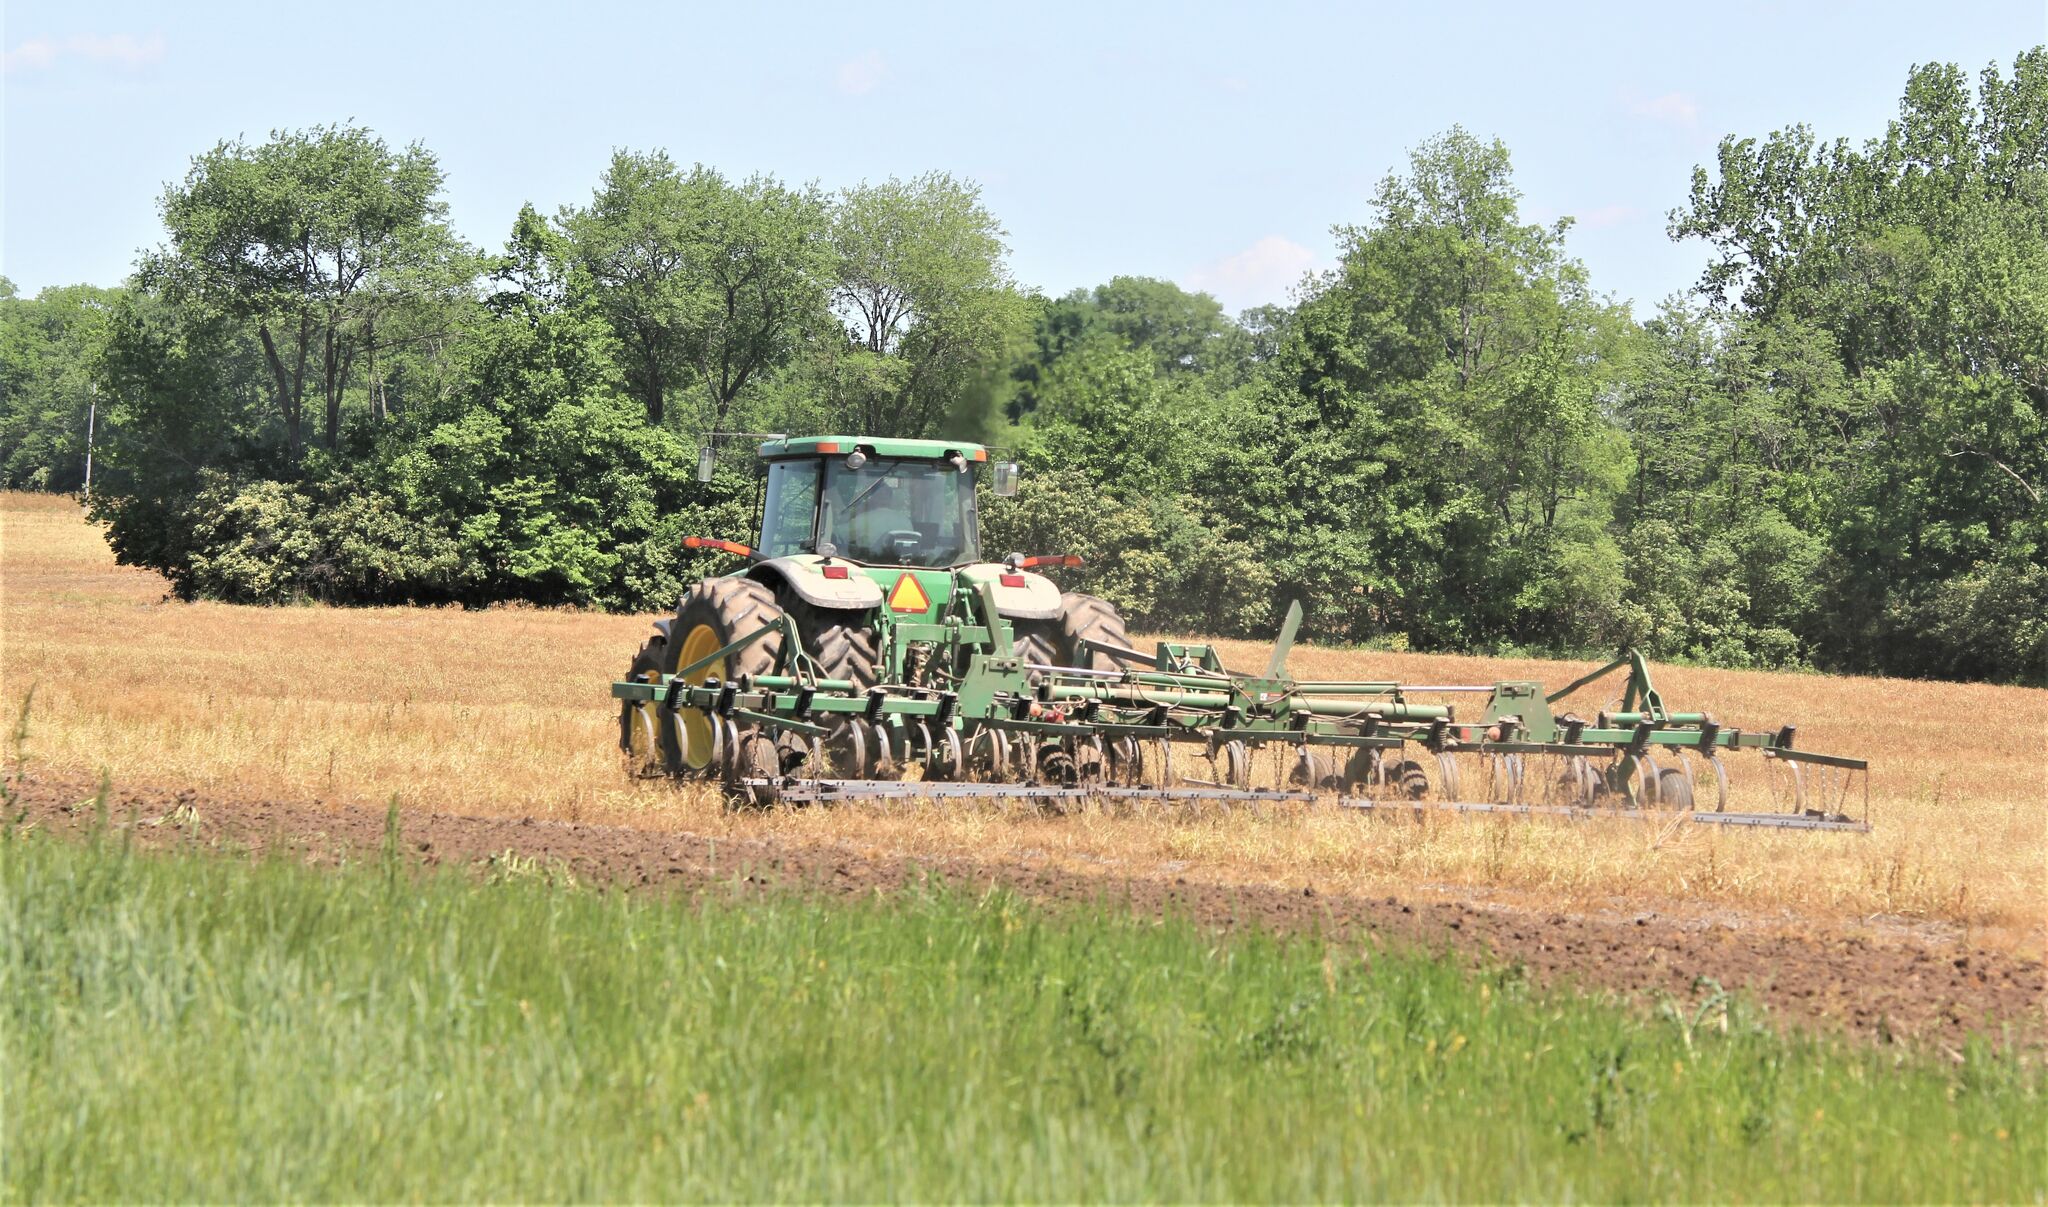 Illinois farmers pick up planting pace